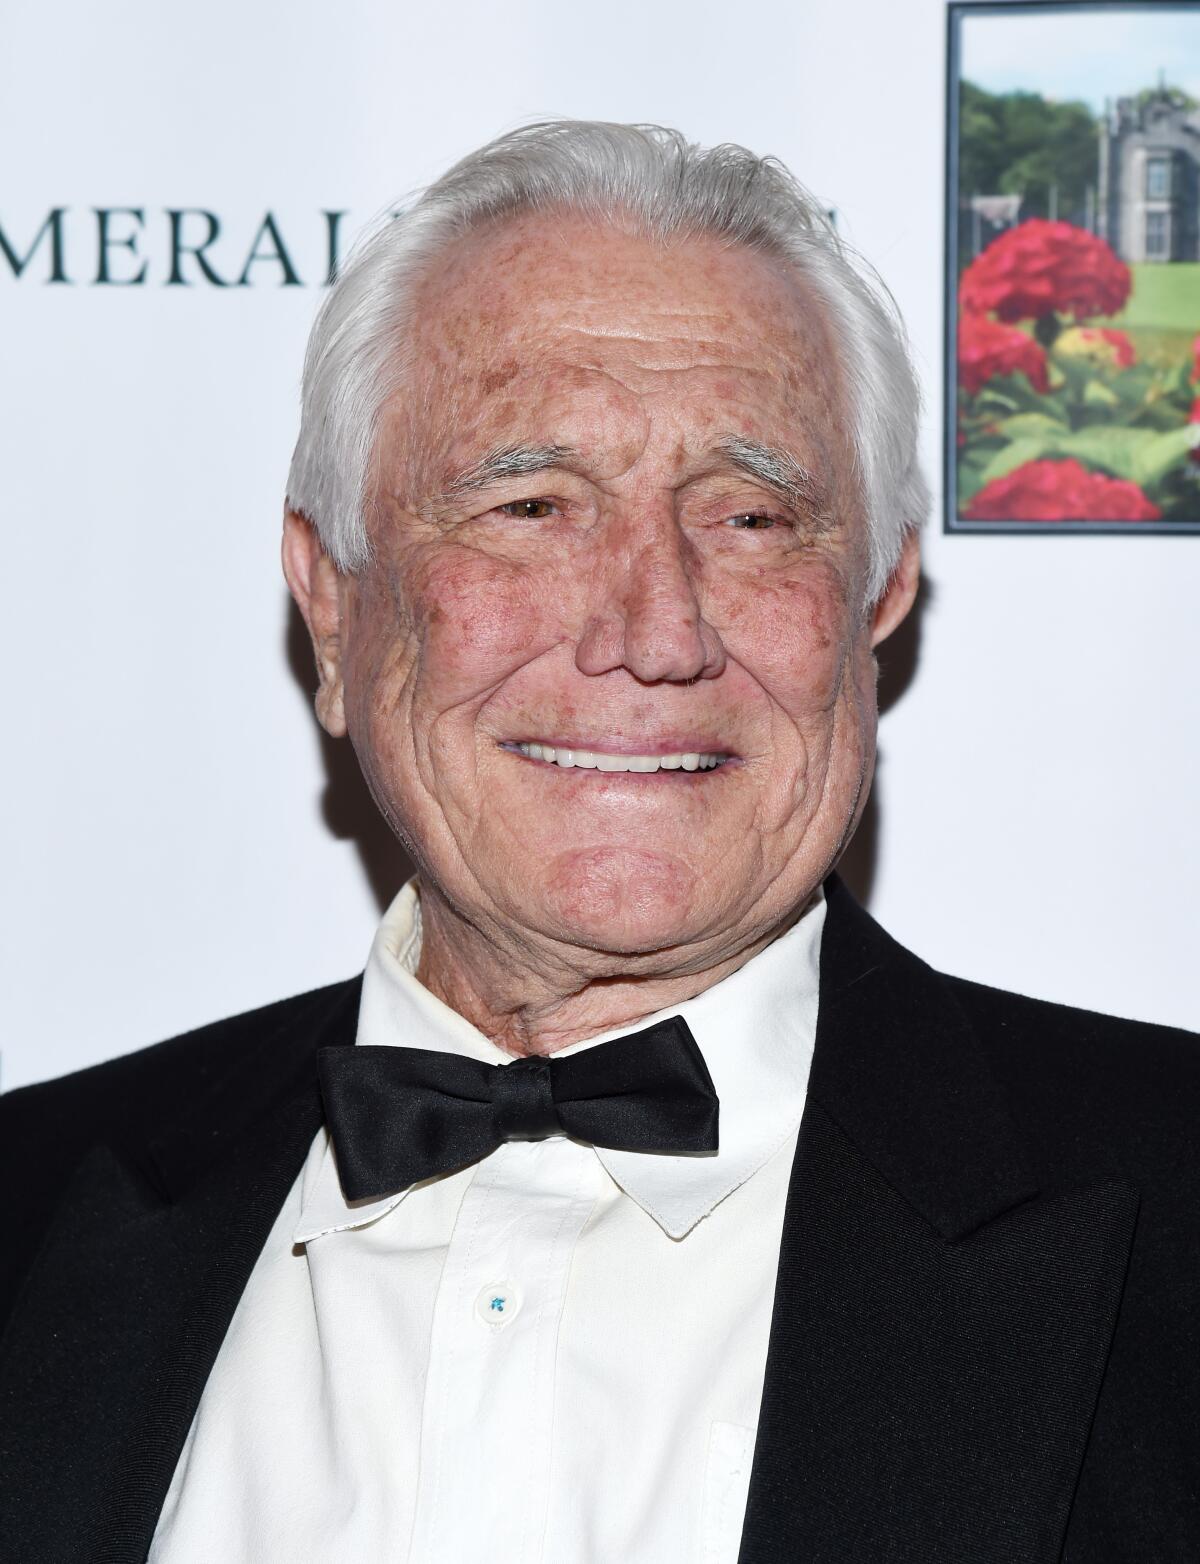 George Lazenby smiles and poses as he looks off camera while wearing a black and white tuxedo